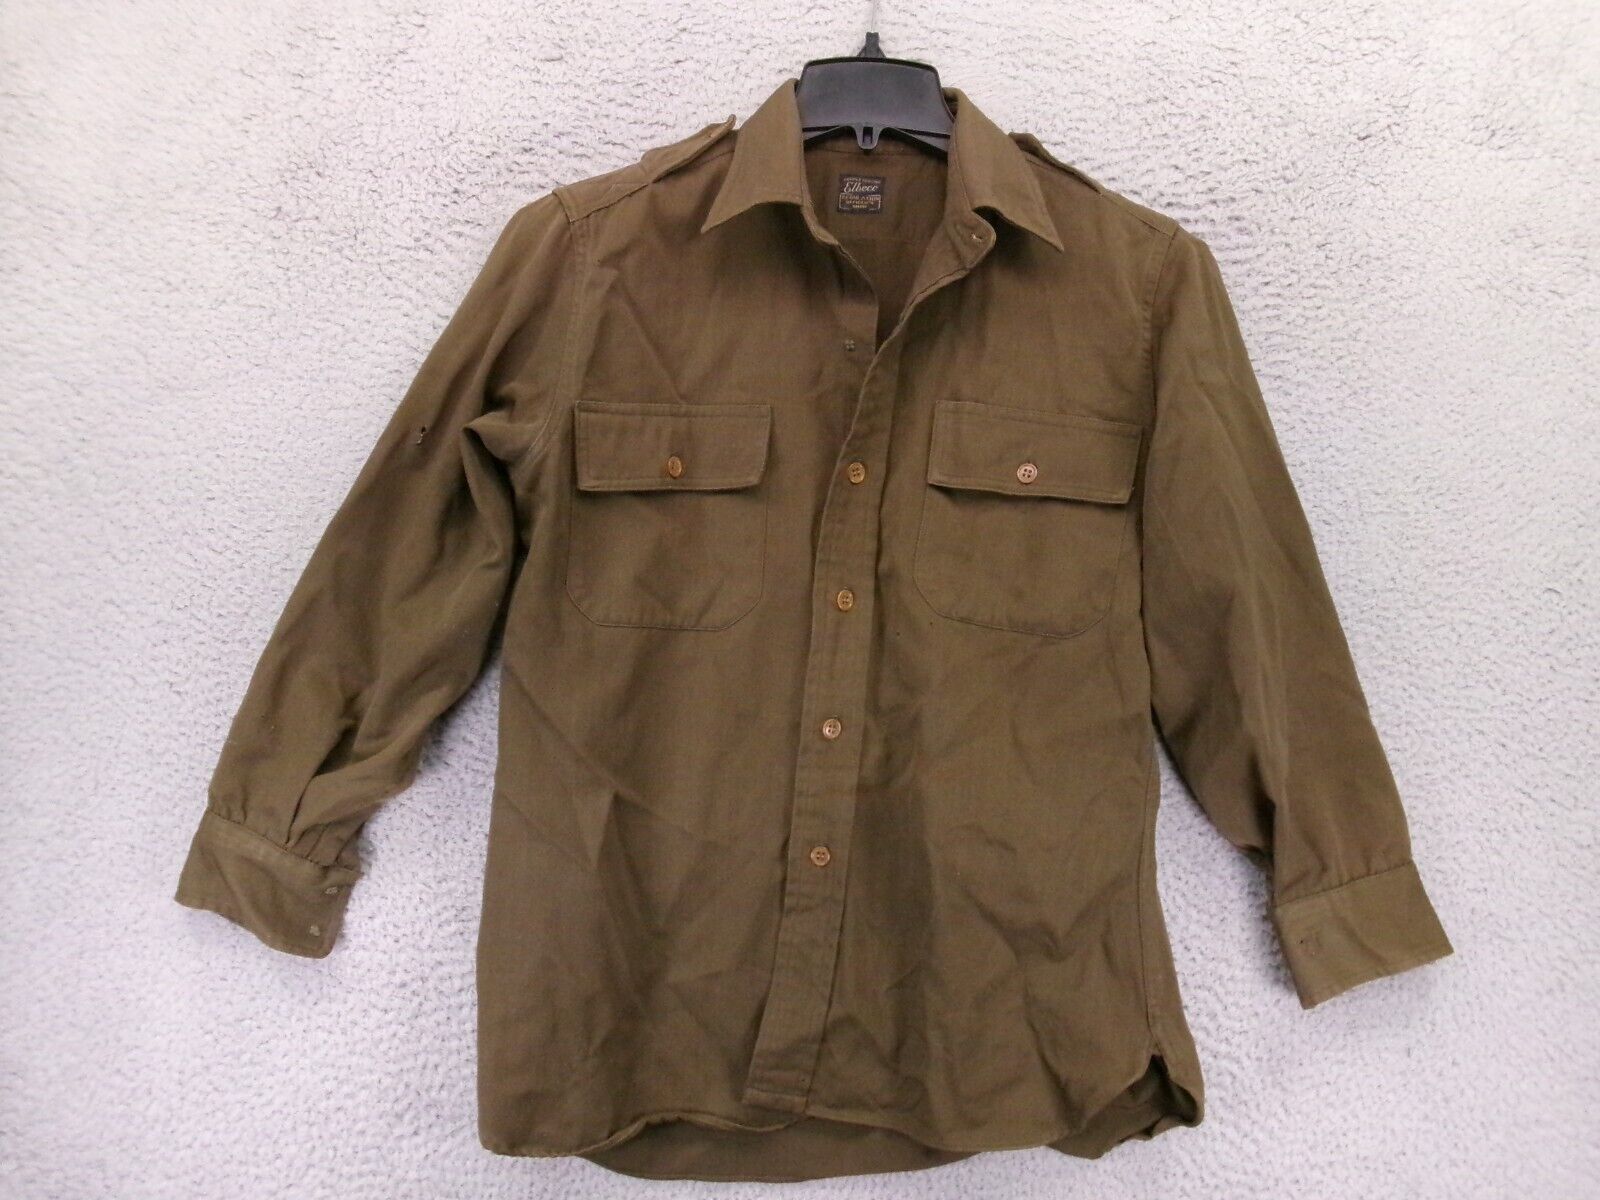 Vintage 50s 60s Elbeco Officer's Shirt Mens Medium Green Army Military Law